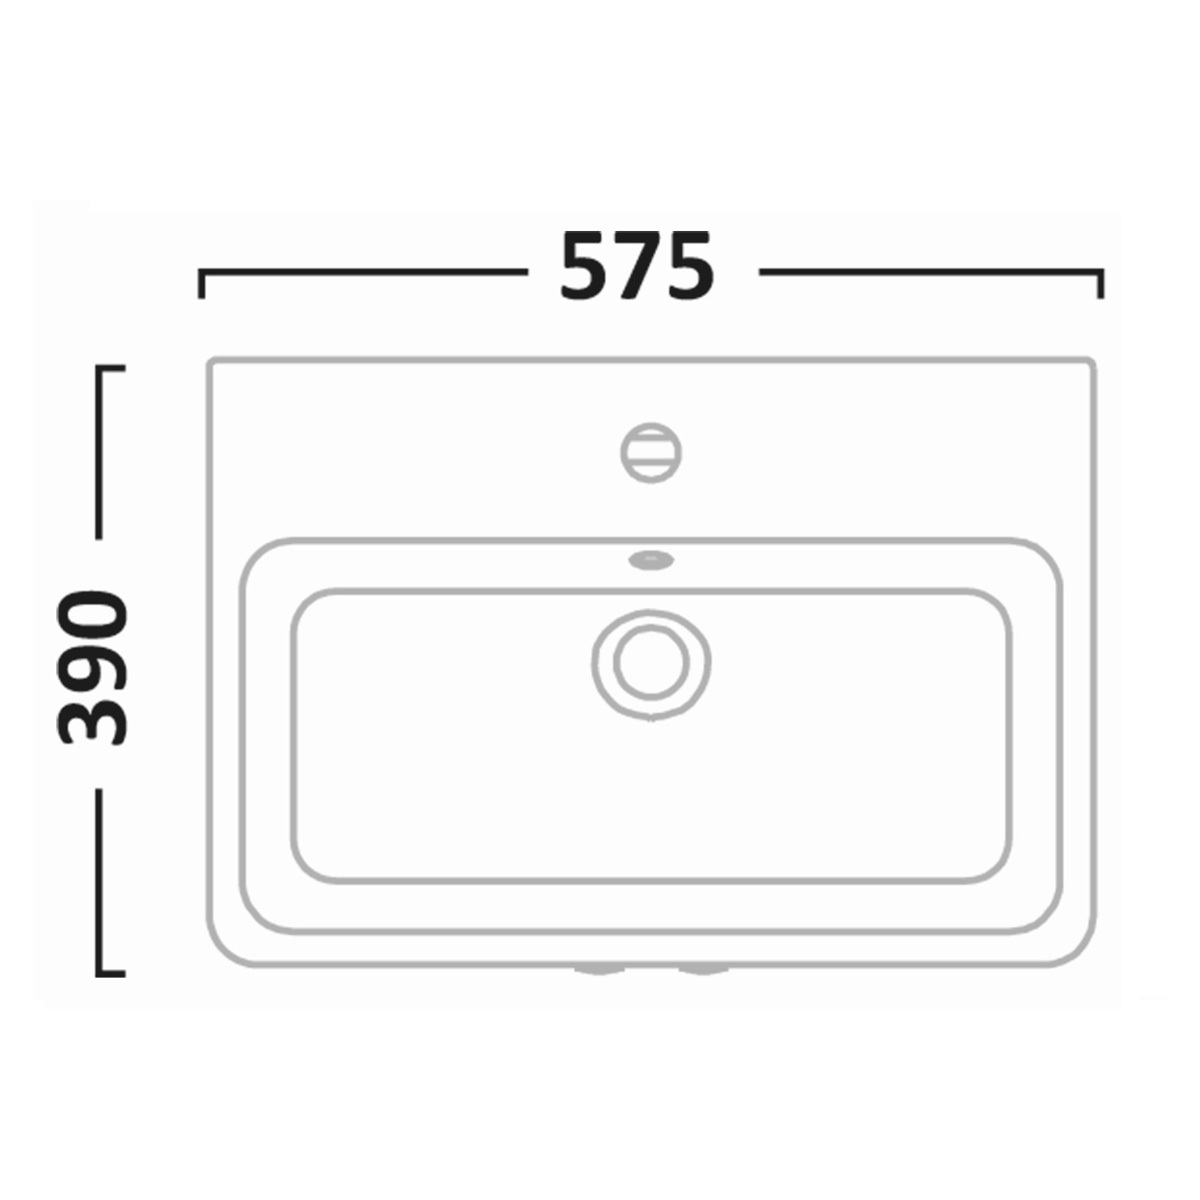 Line drawing of sink on white background